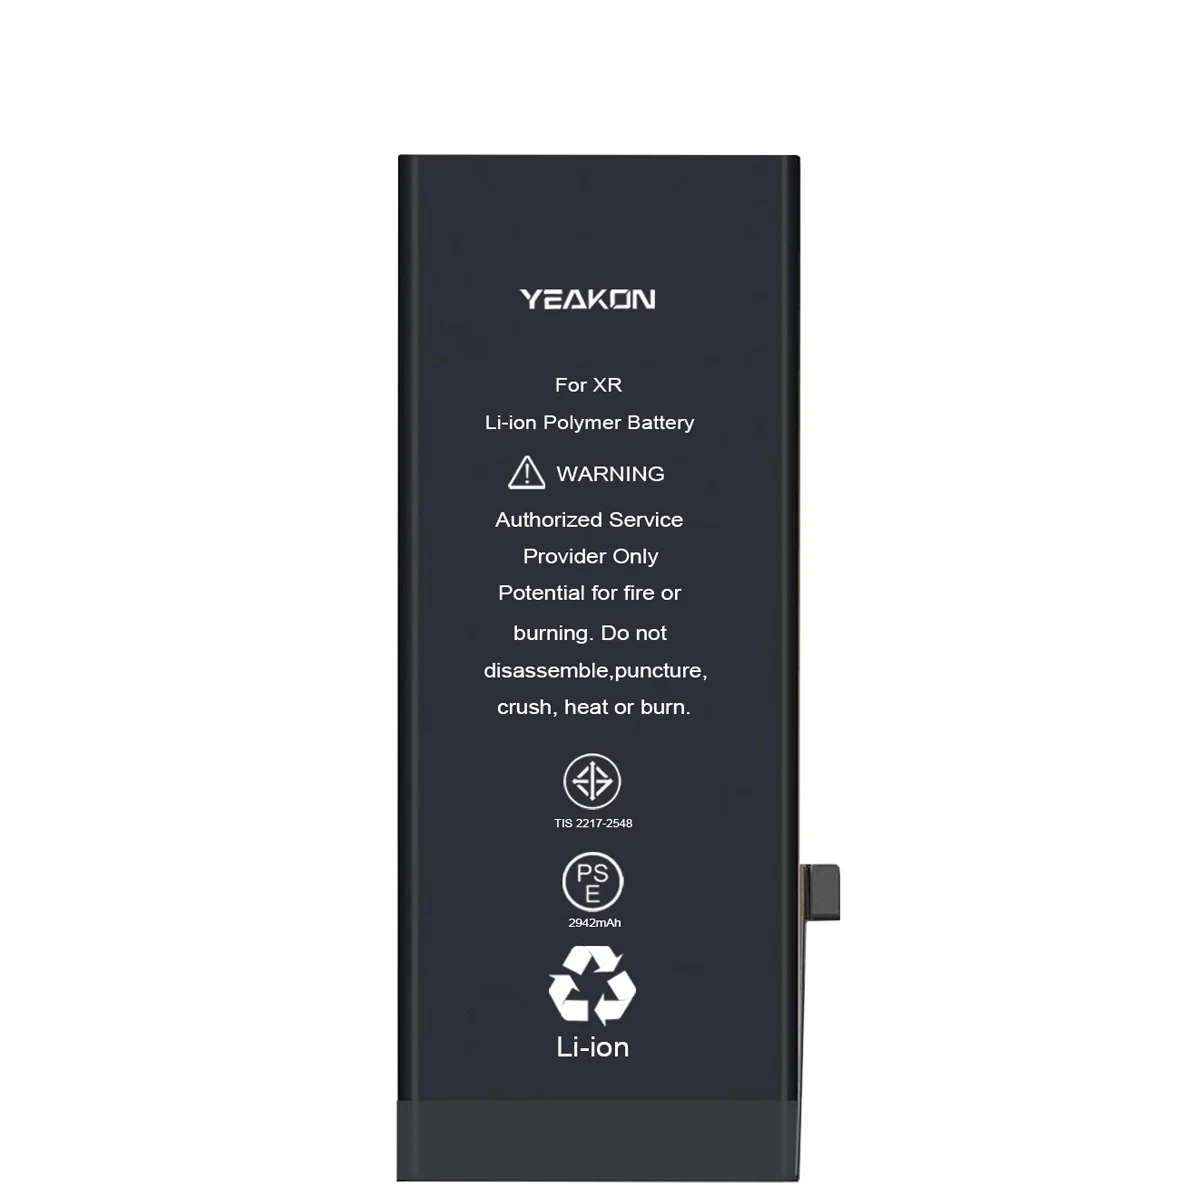 

YEAKON XR Battery Replacement For iPhone 5 5S 5C SE 6 6S 6P 6SP 7 7G 7P 8 8G 8P Plus X XS MAX XR 11 12 13 Pro MAX Batteries